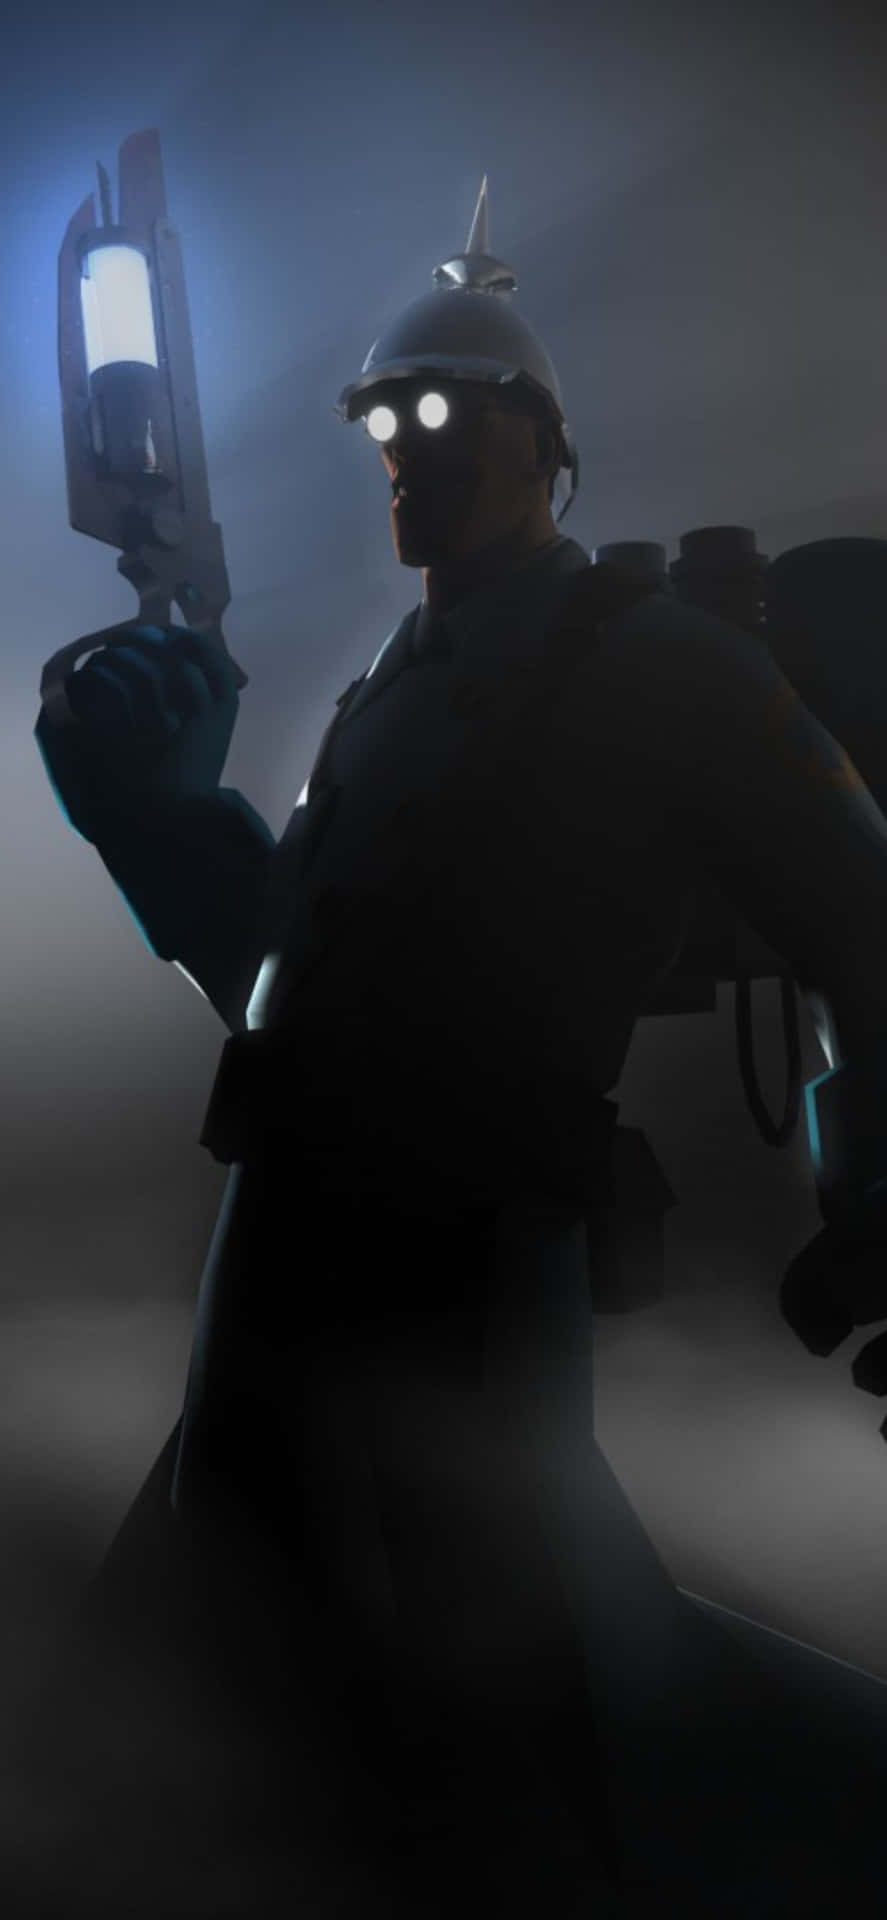 iPhone XS Team Fortress 2 Medic Silhouette Background